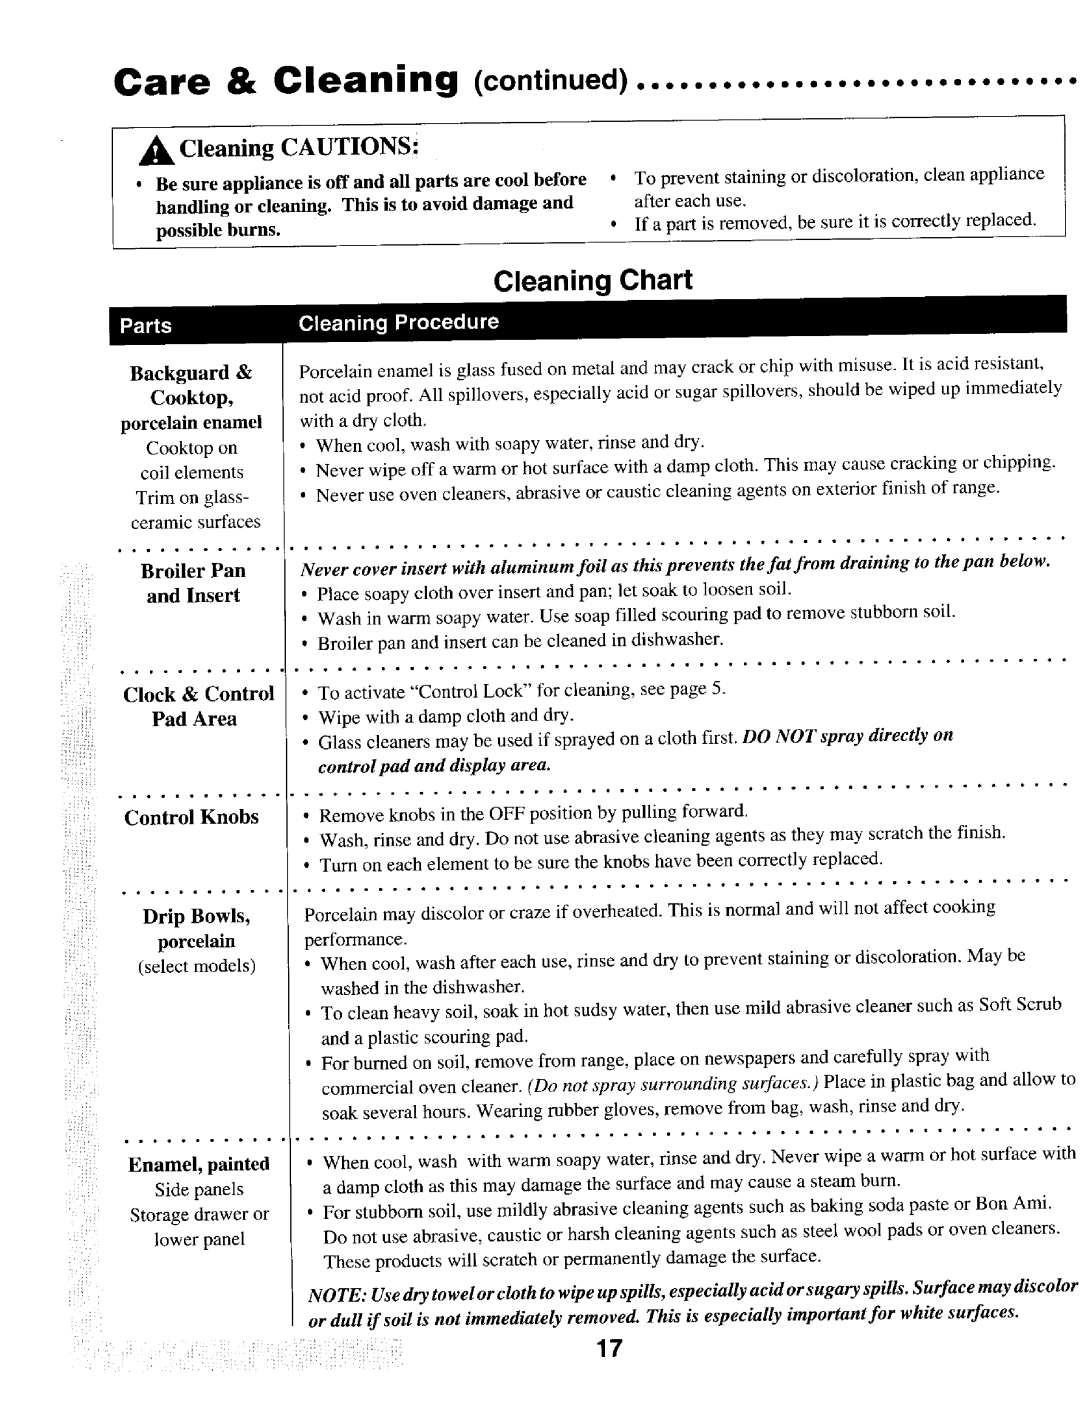 Maytag T1 manual Care & Cleaning continued, CleaningChart, ACleaning CAUTIONS 